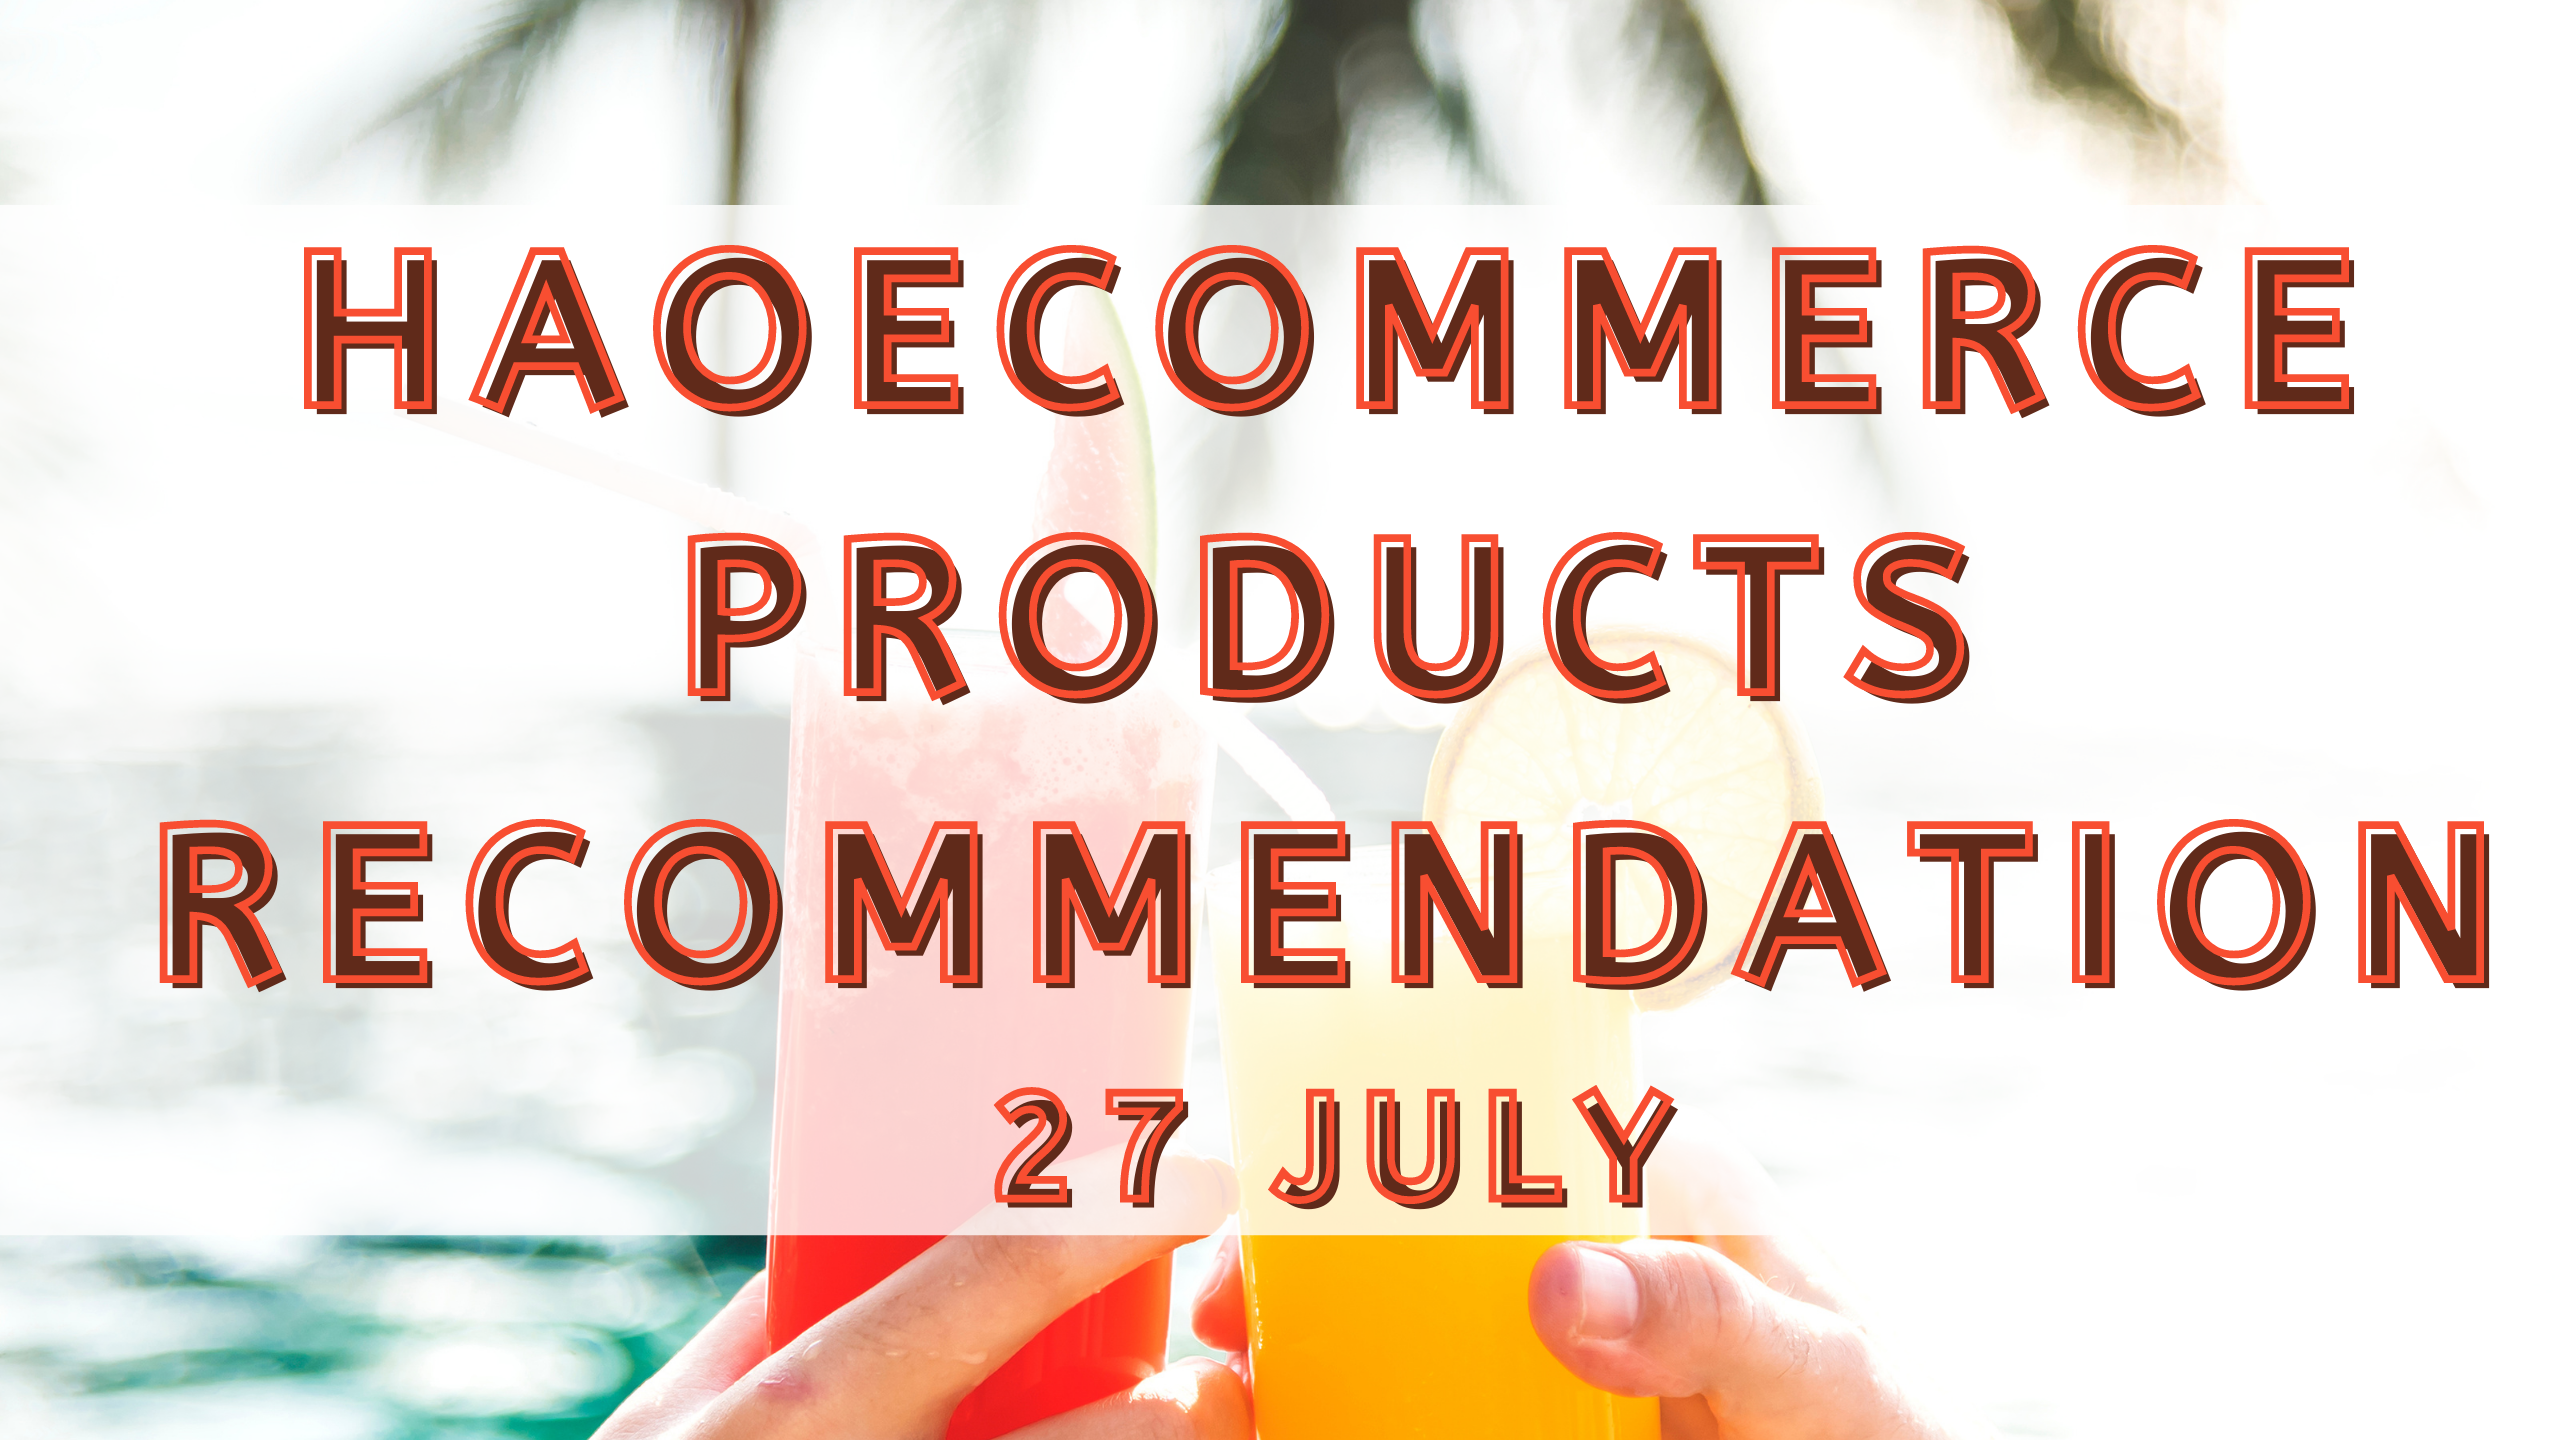 Products recommandation 27 July